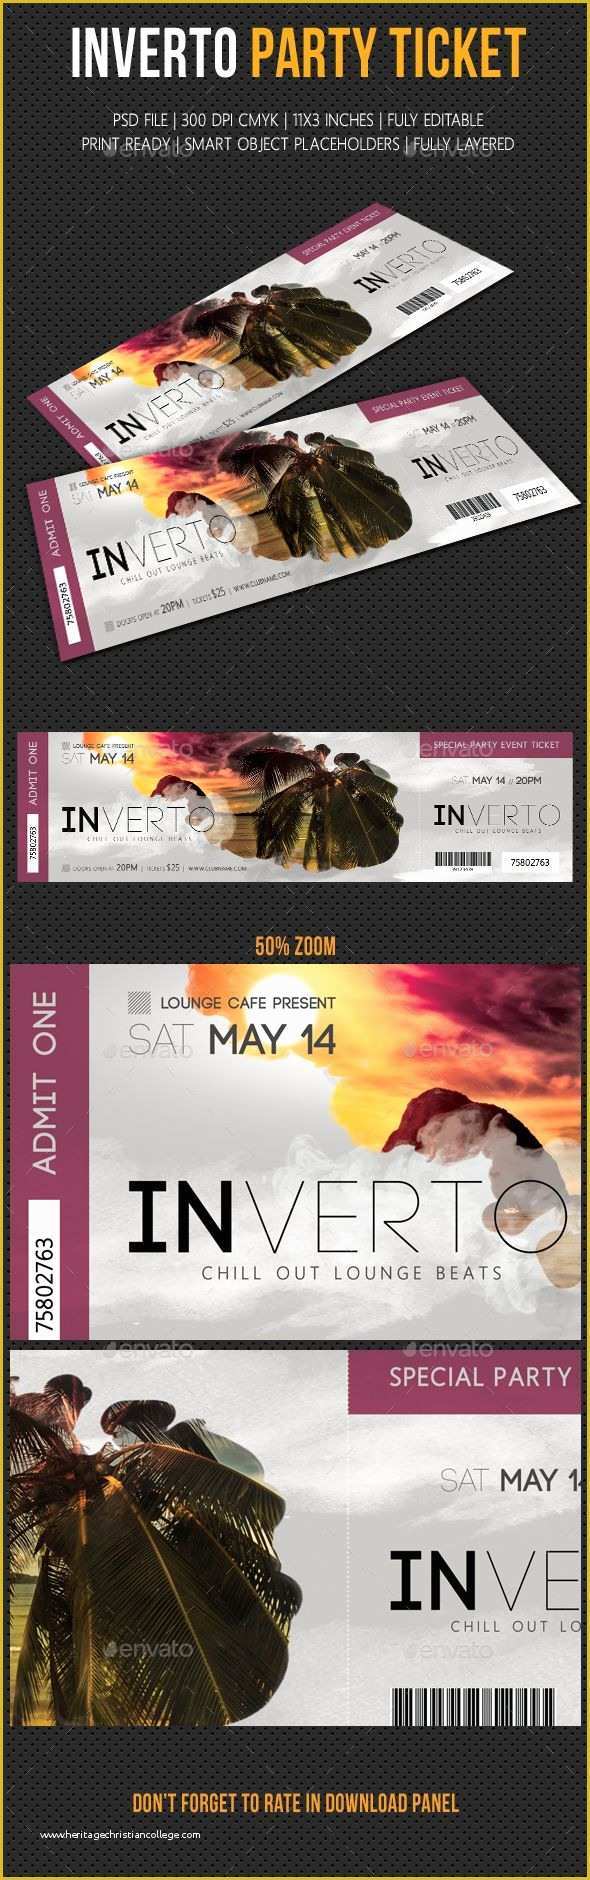 Event Ticket Template Psd Free Download Of Best 25 event Tickets Ideas On Pinterest